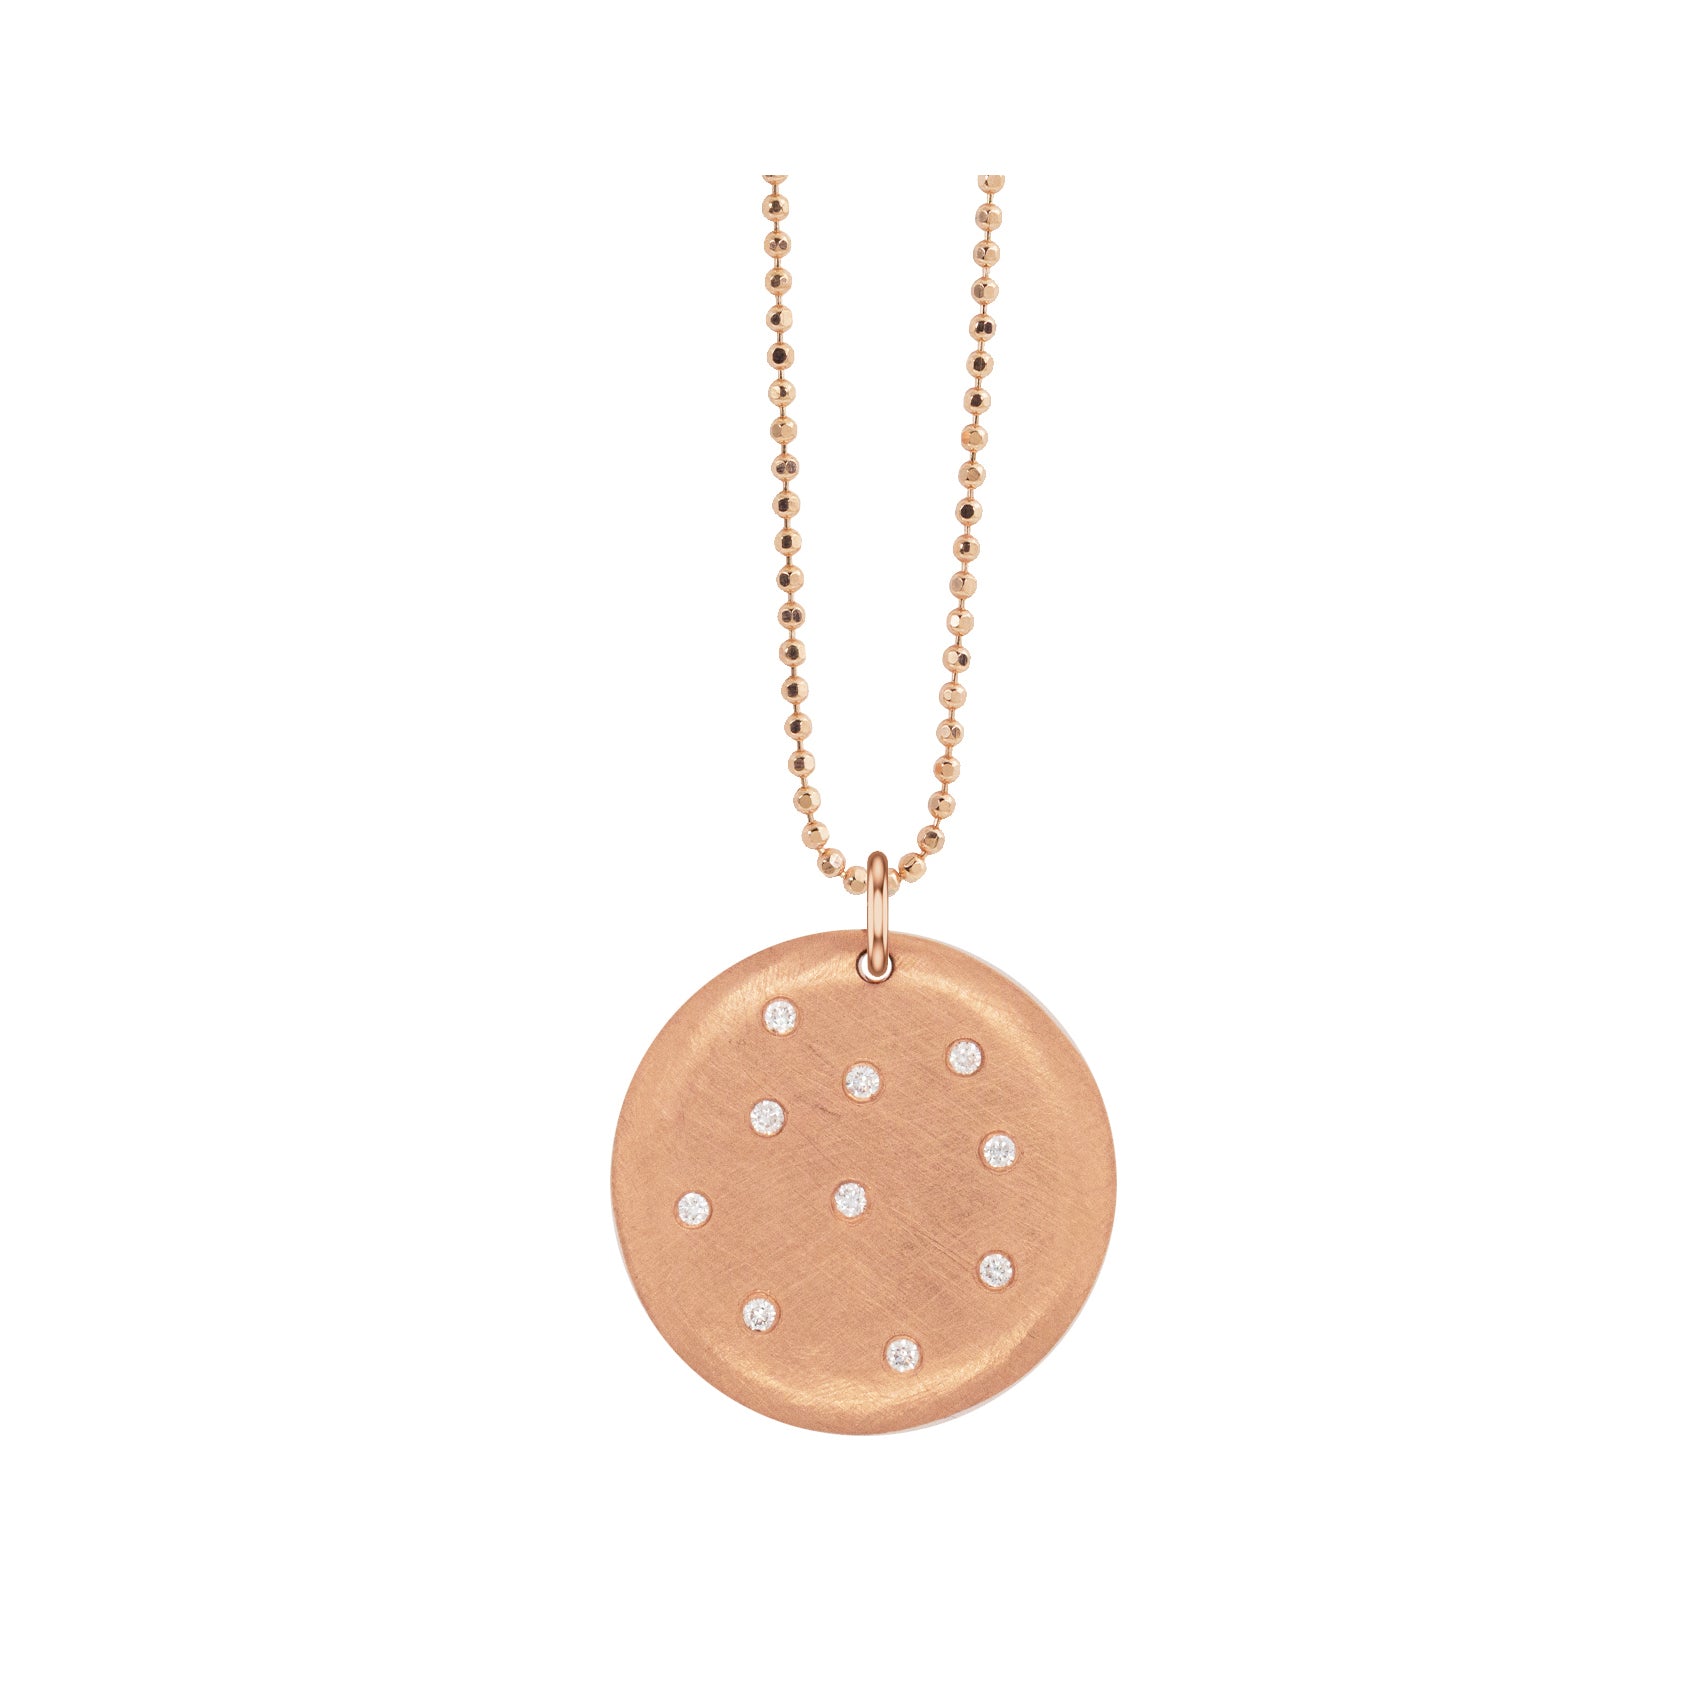 14k rose gold CELA round pendant with scattered diamonds